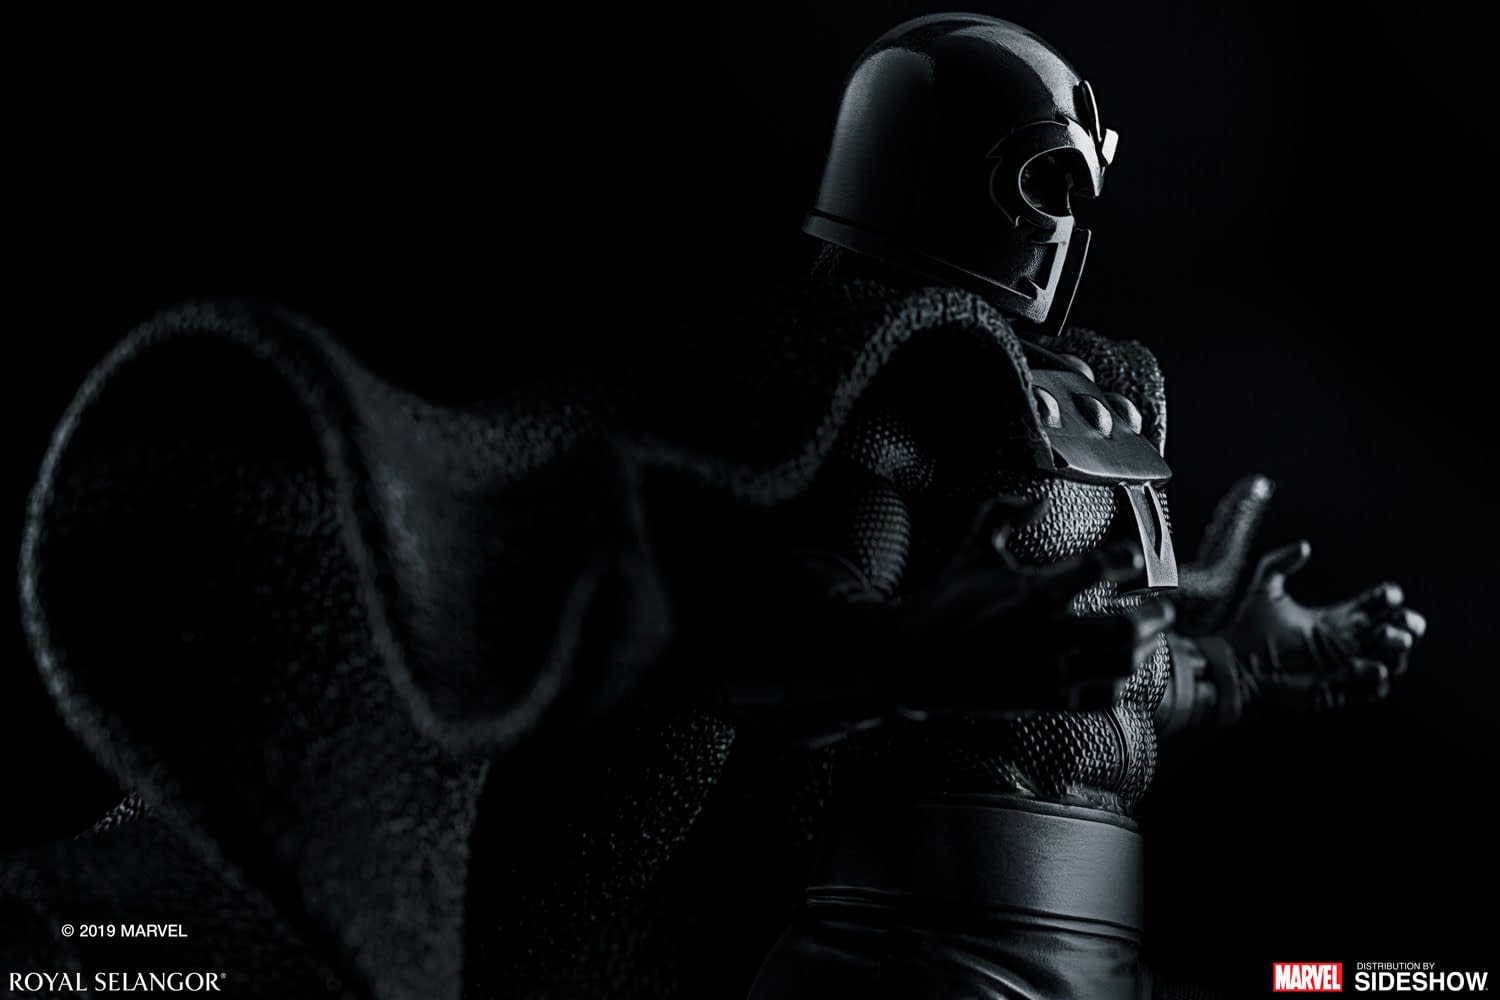 Magneto is the Master of Magnetism with New Statue